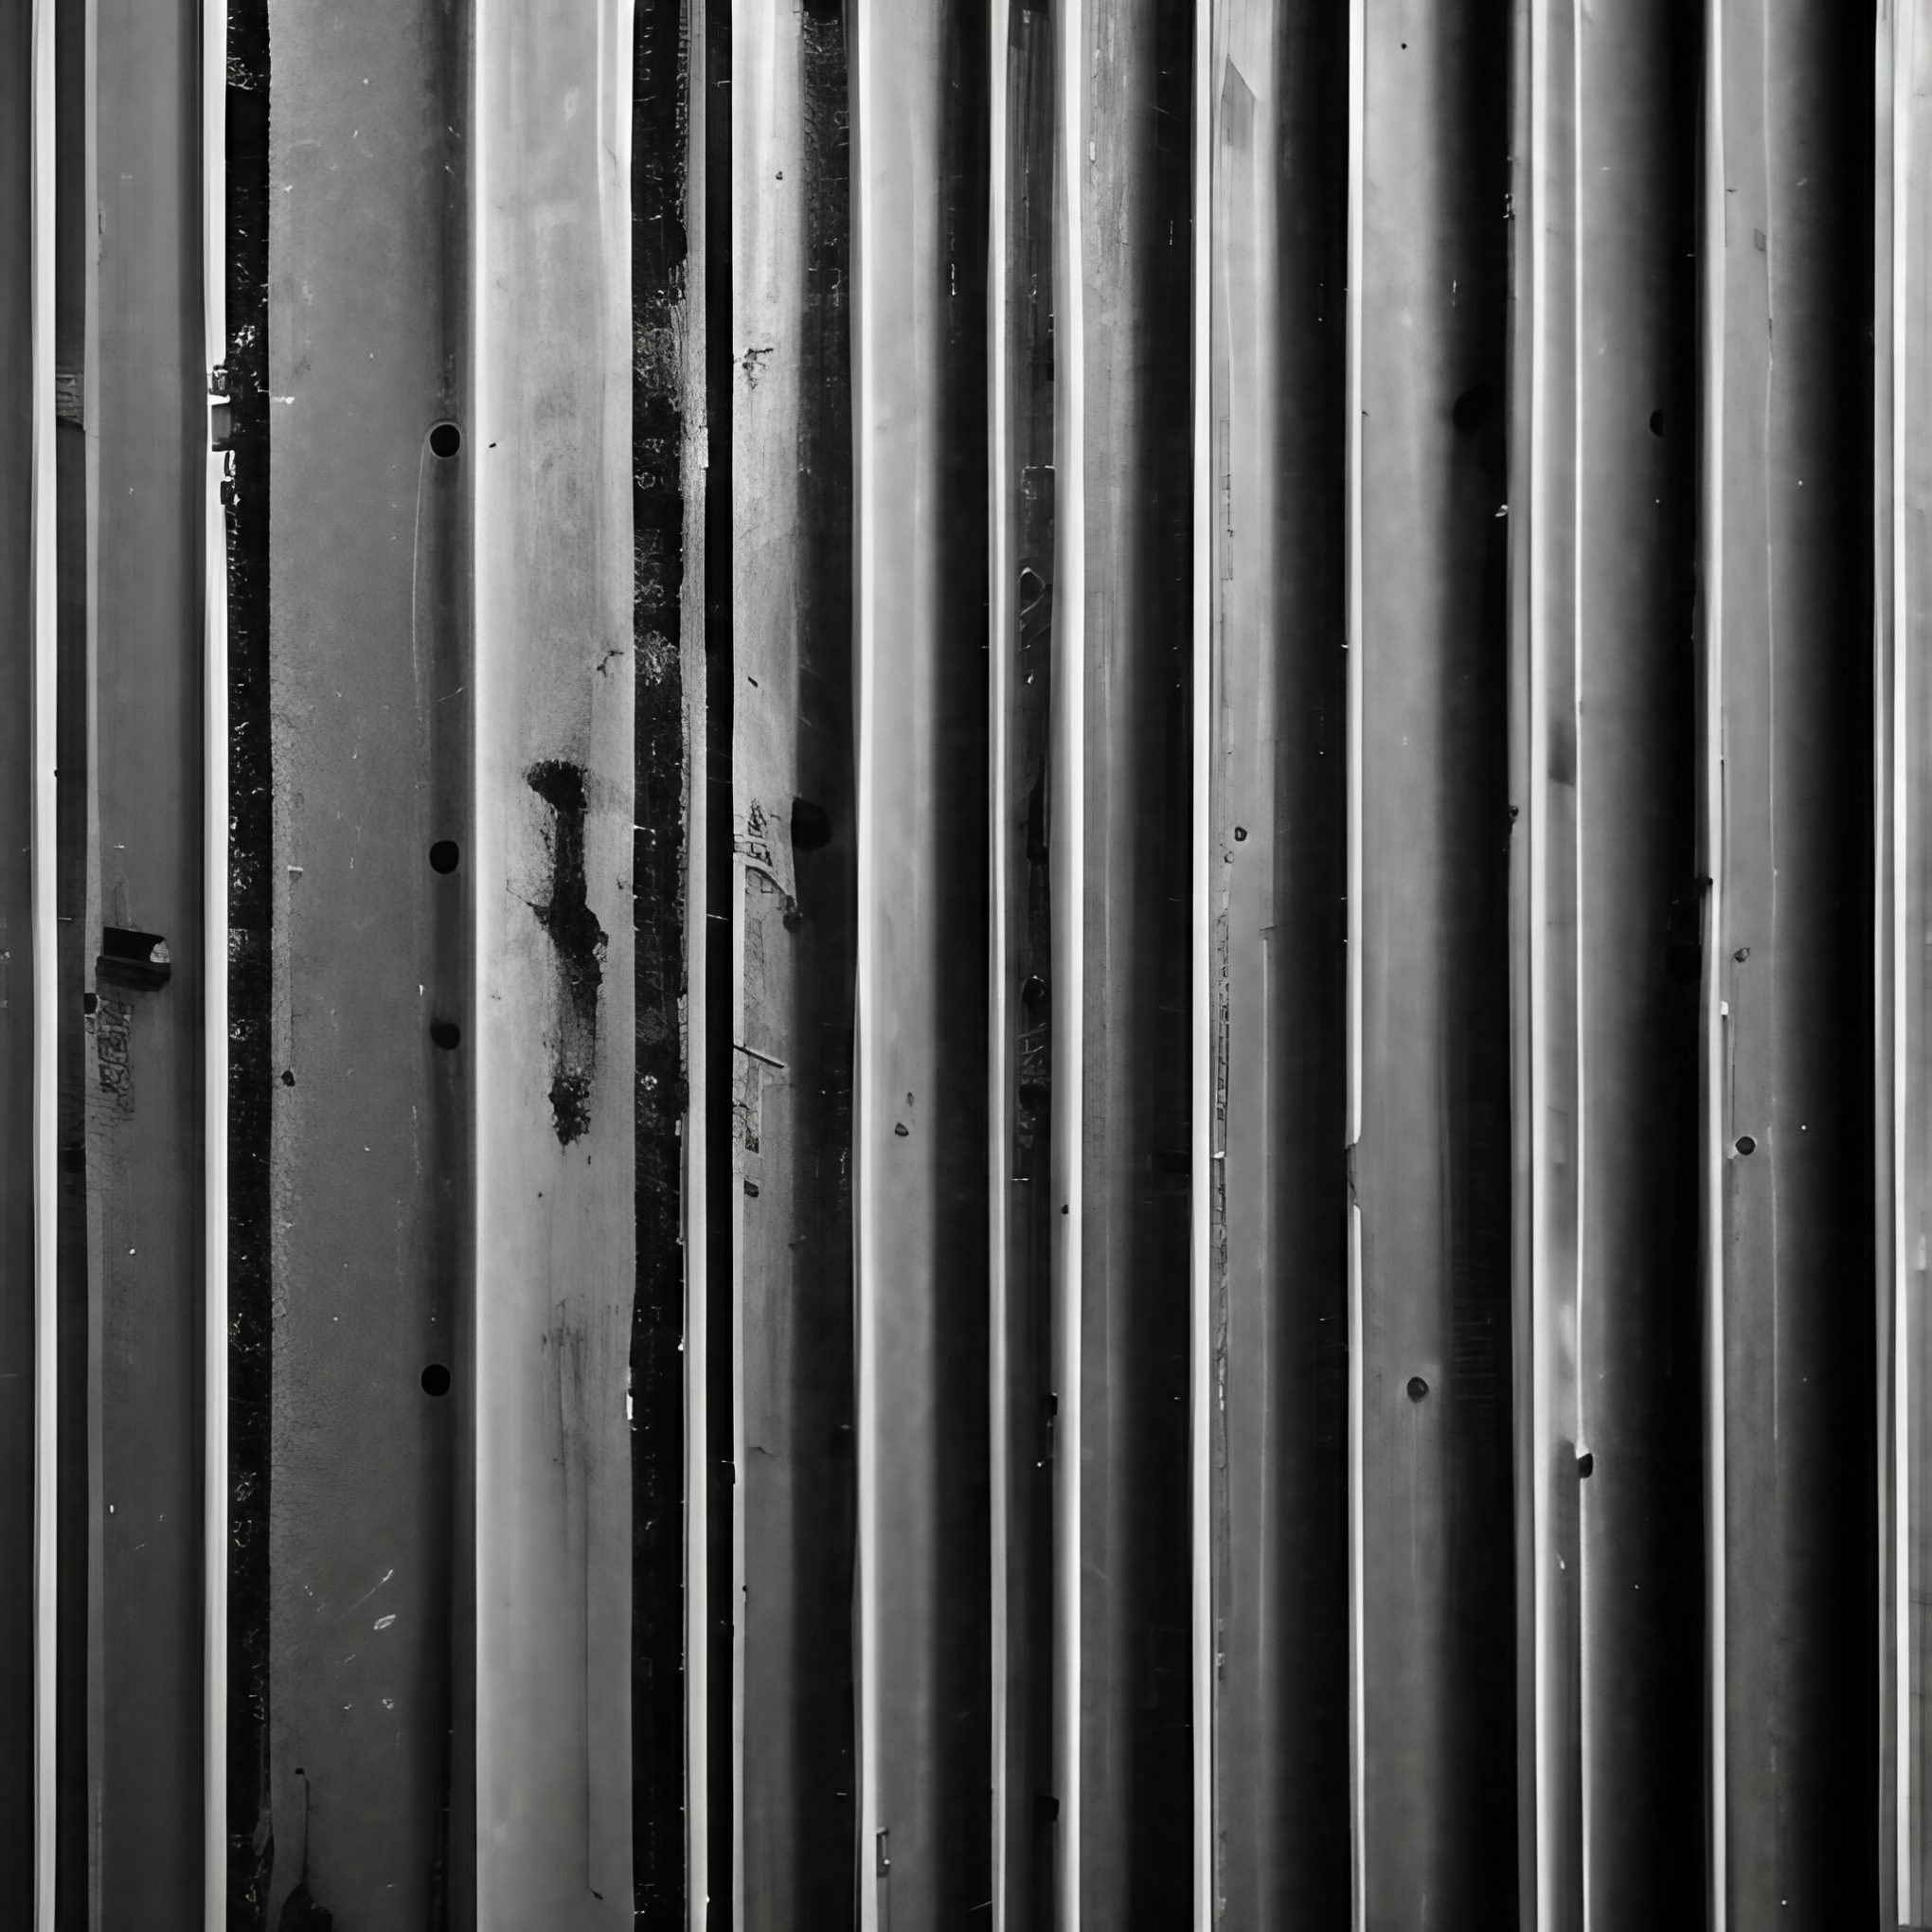 Metal Corrugated Galvanised Wall Background Free Stock Image Texture